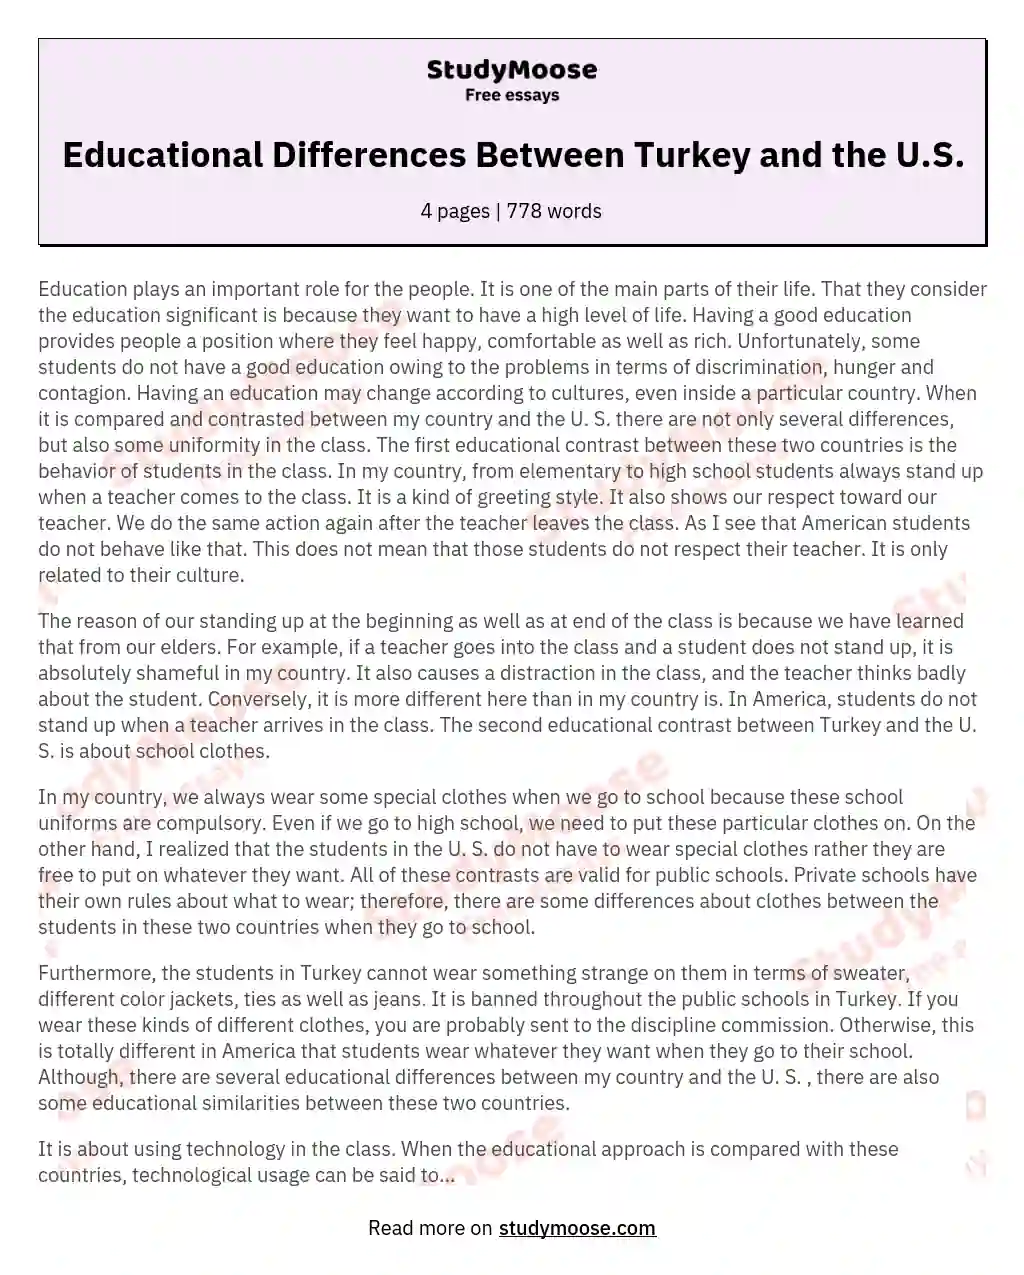 Educational Differences Between Turkey and the U.S.